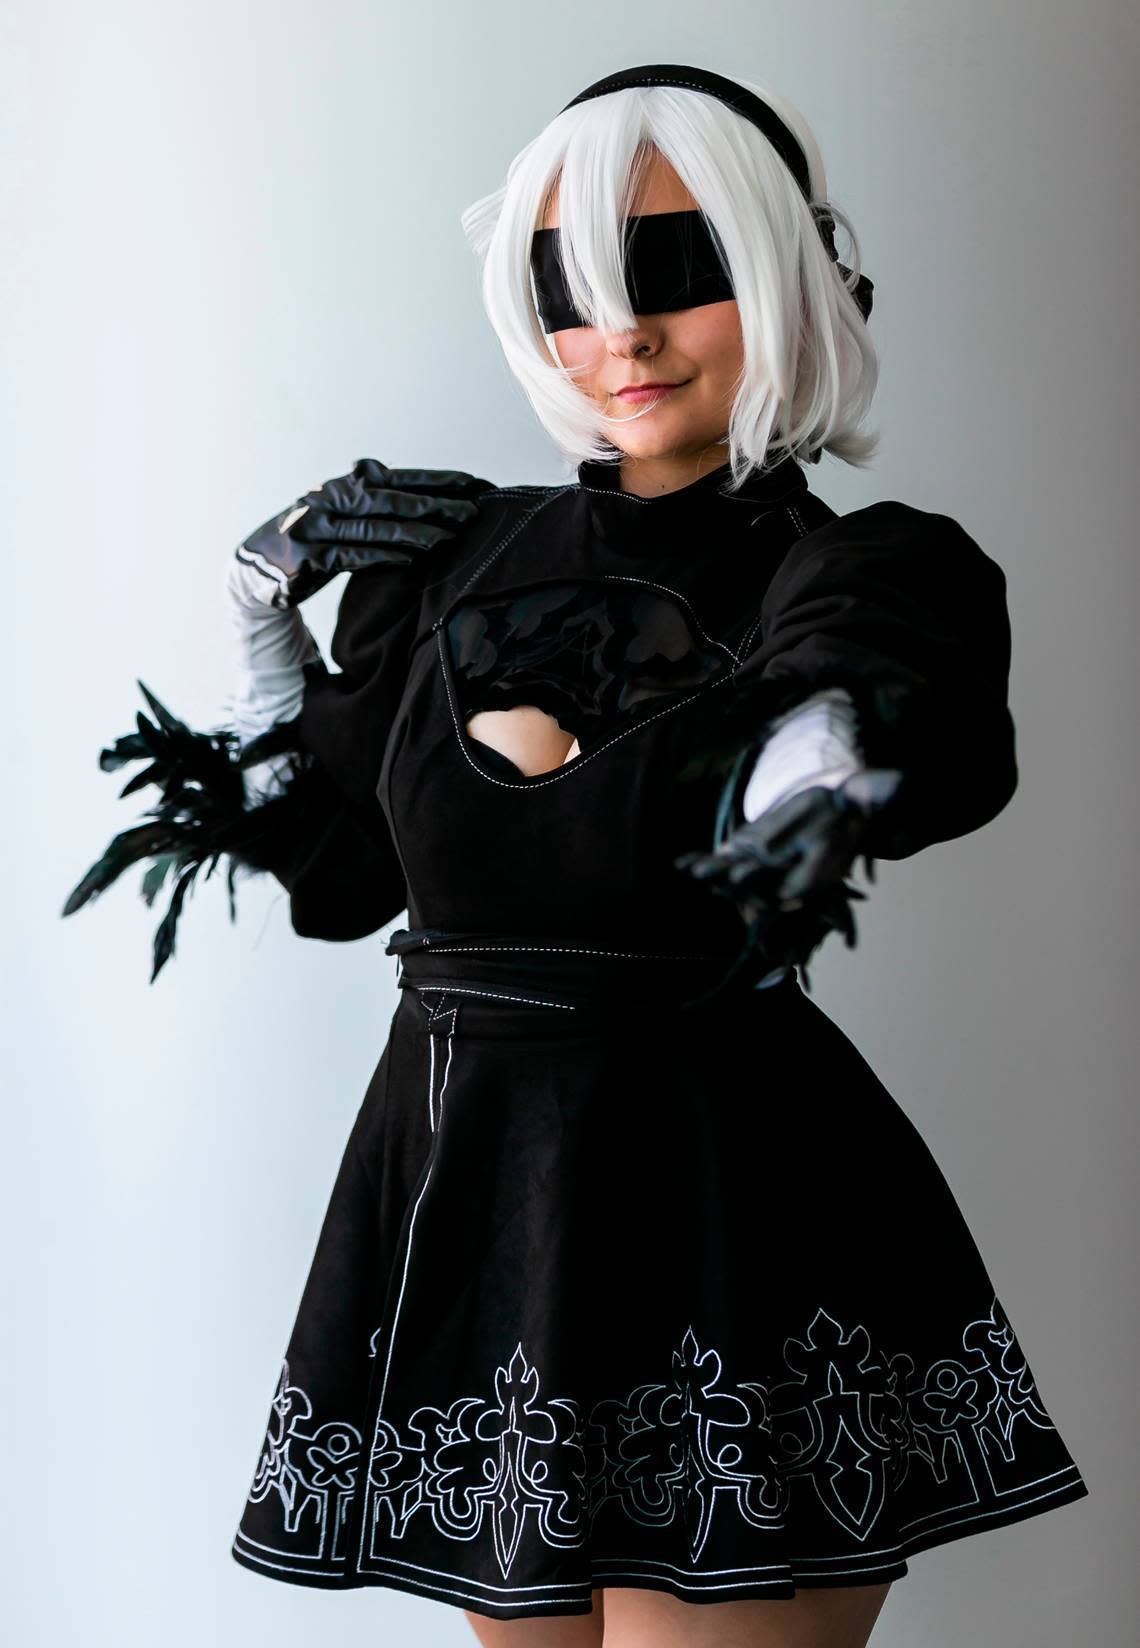 Angeles Parada cosplays as 2B from the video game “Nier: Automata” during Florida Supercon.